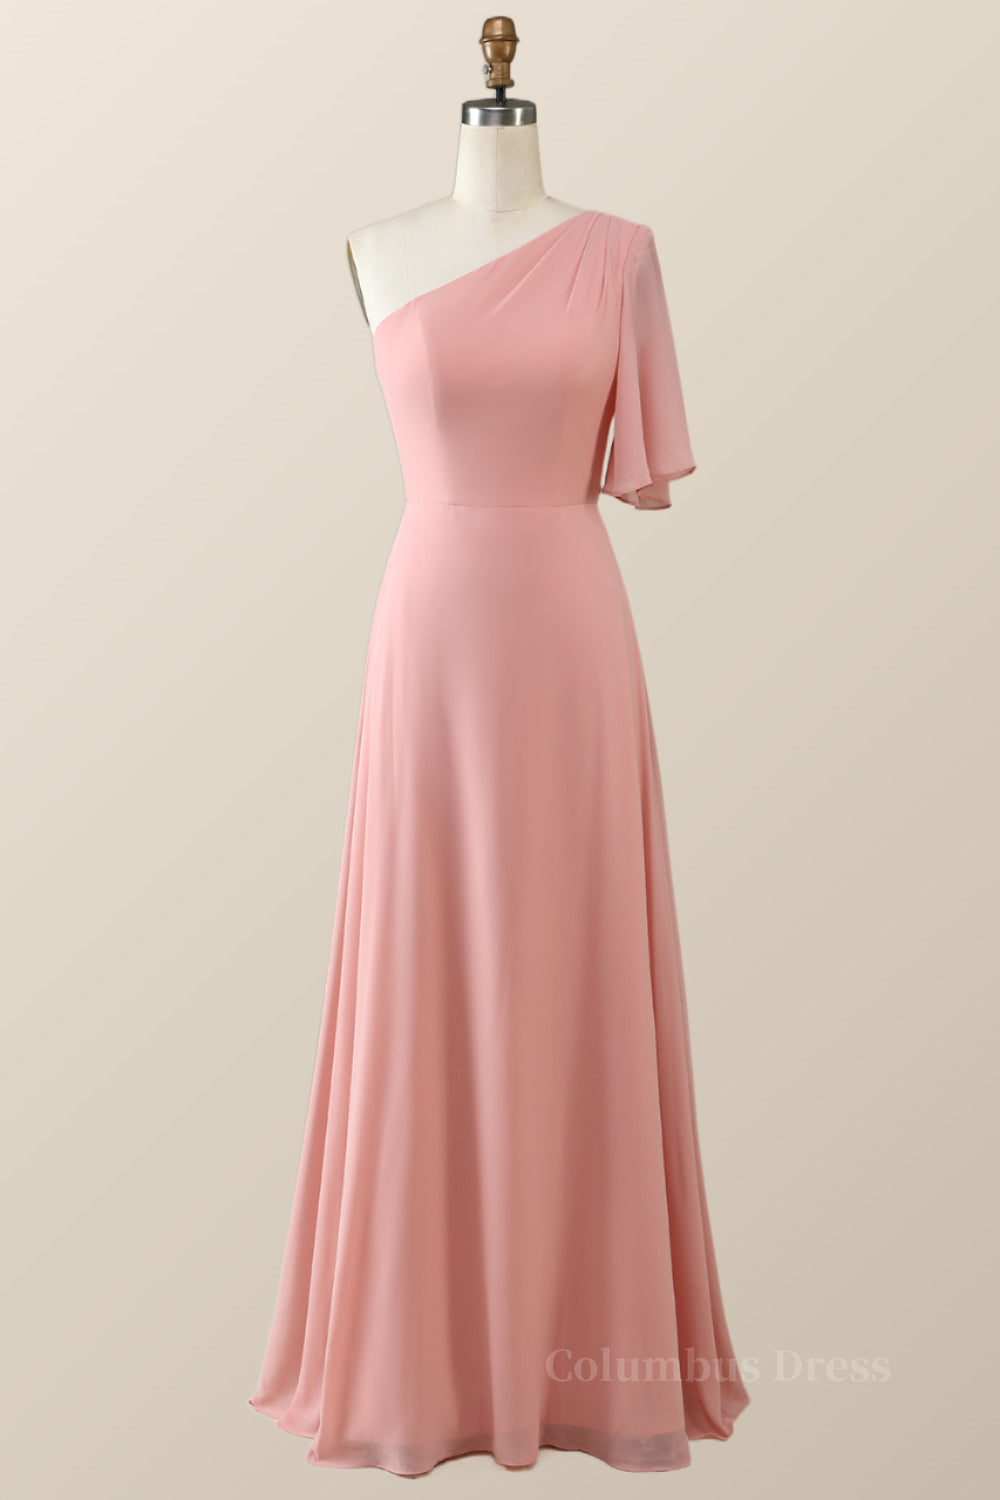 One Shoulder Blush Pink Chiffon Long Corset Bridesmaid Dress outfit, Prom Dresses Guide